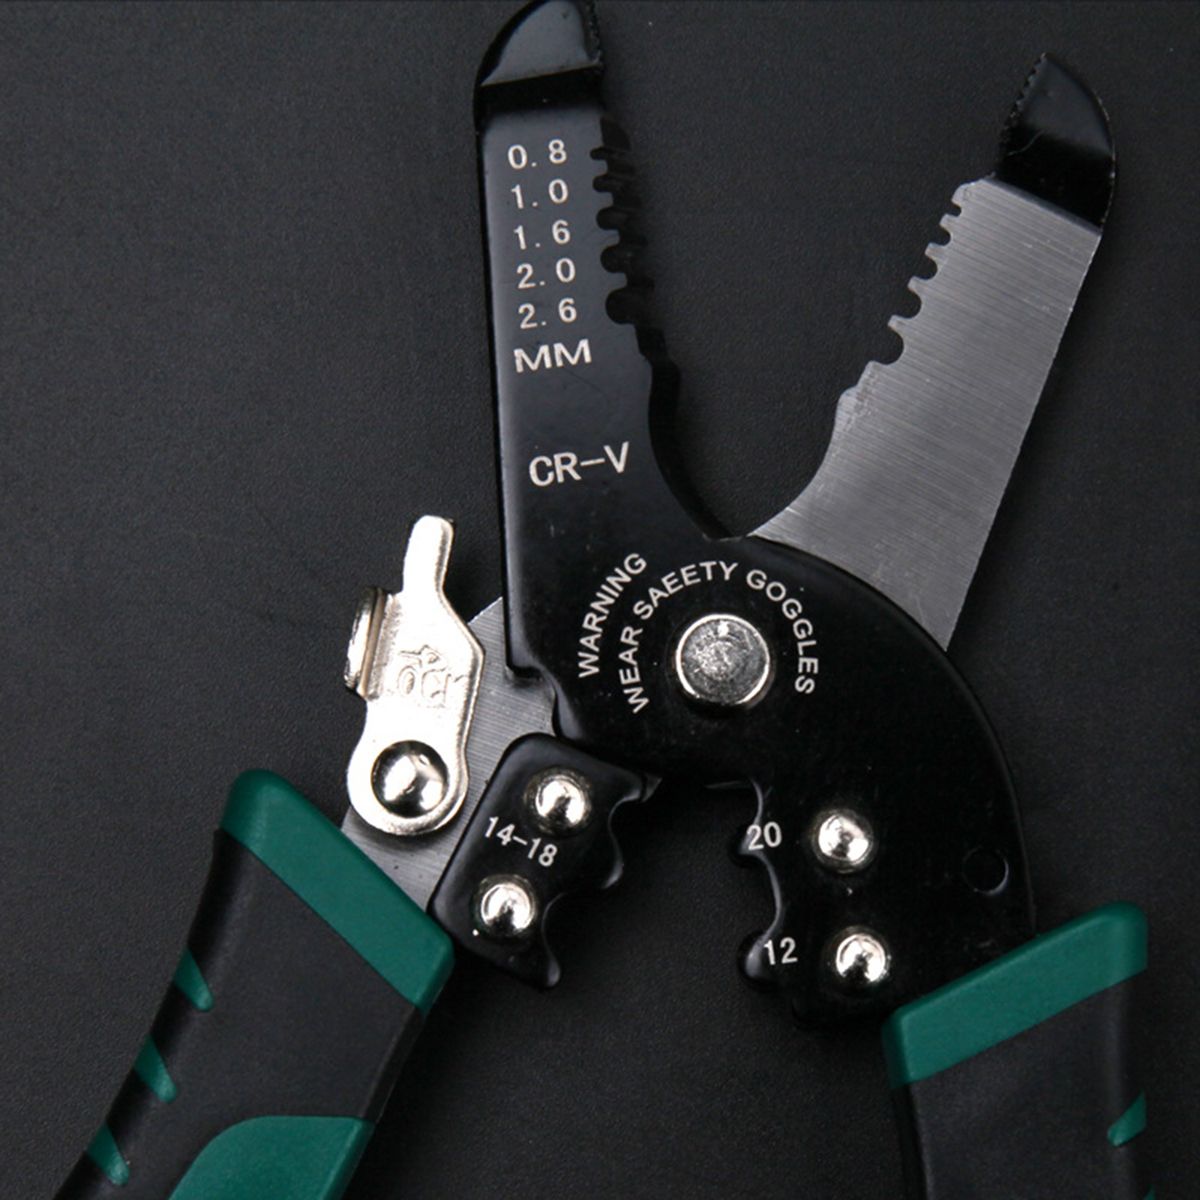 3-in-1-Cable-Wire-Stripper-Cutter-Crimper-Plier-Multifunctional-Terminal-Tool-1577507